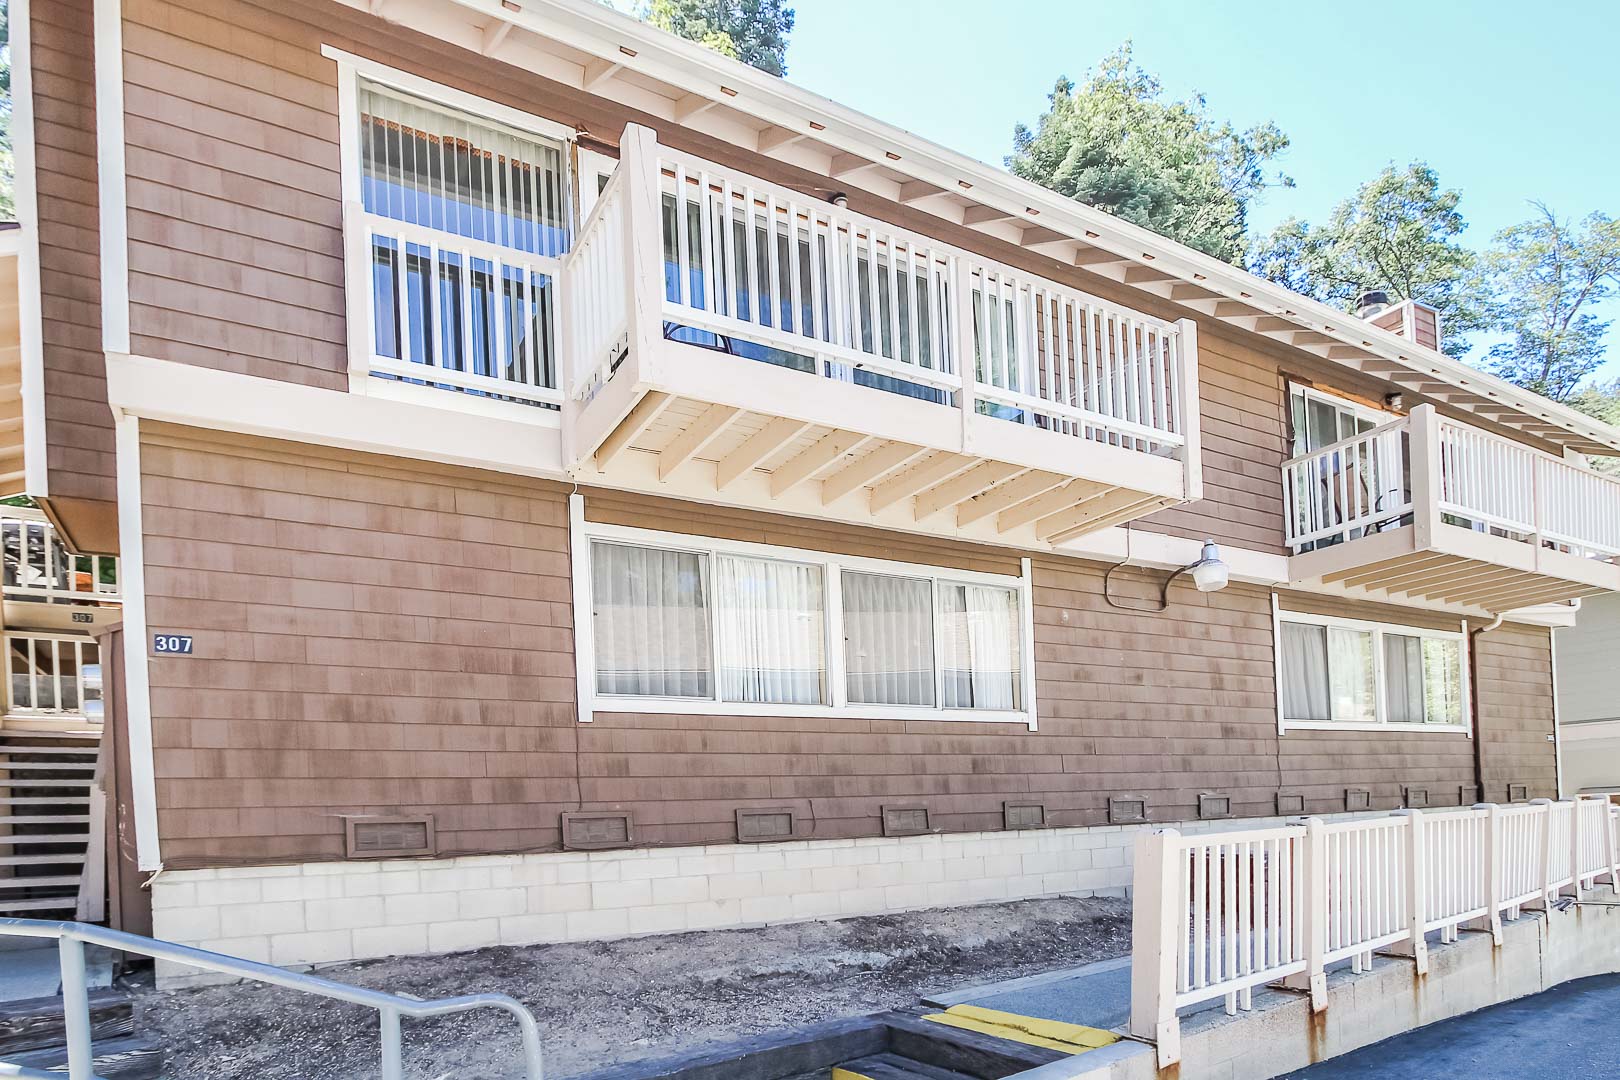 An outside view of the units at VRI's Lake Arrowhead Chalets in California.